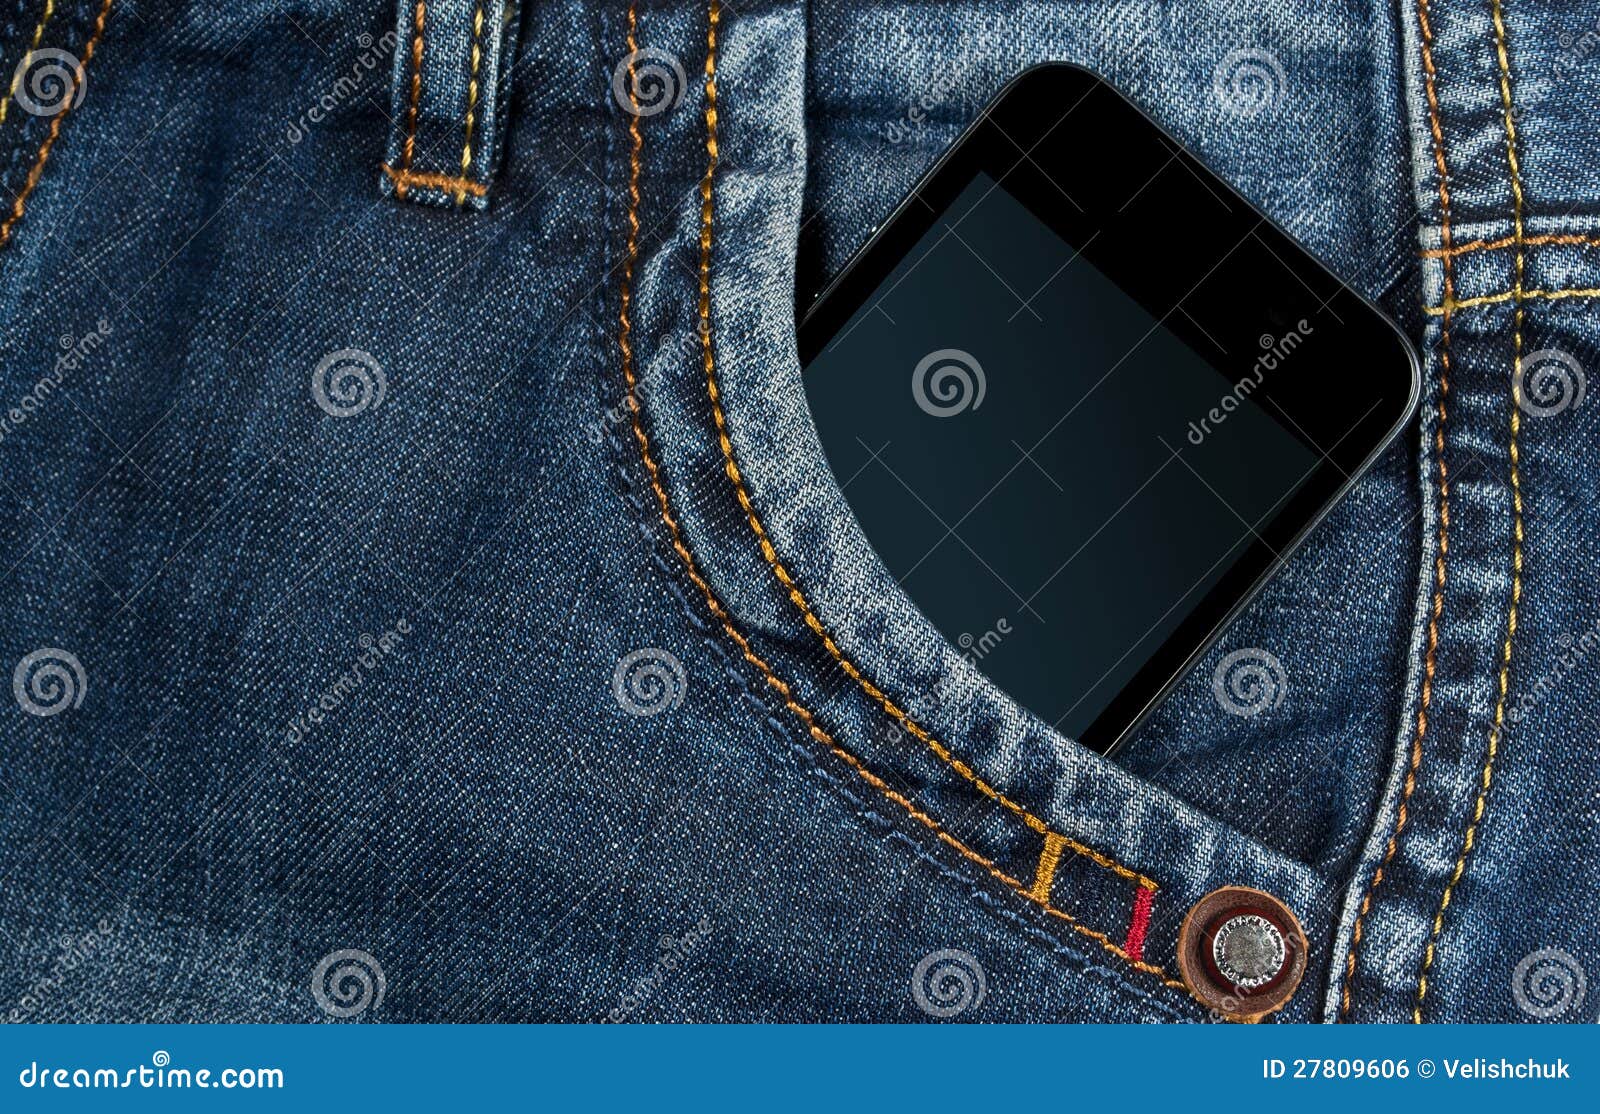 Smartphone in Your Pocket Blue Jeans Stock Photo - Image of ...